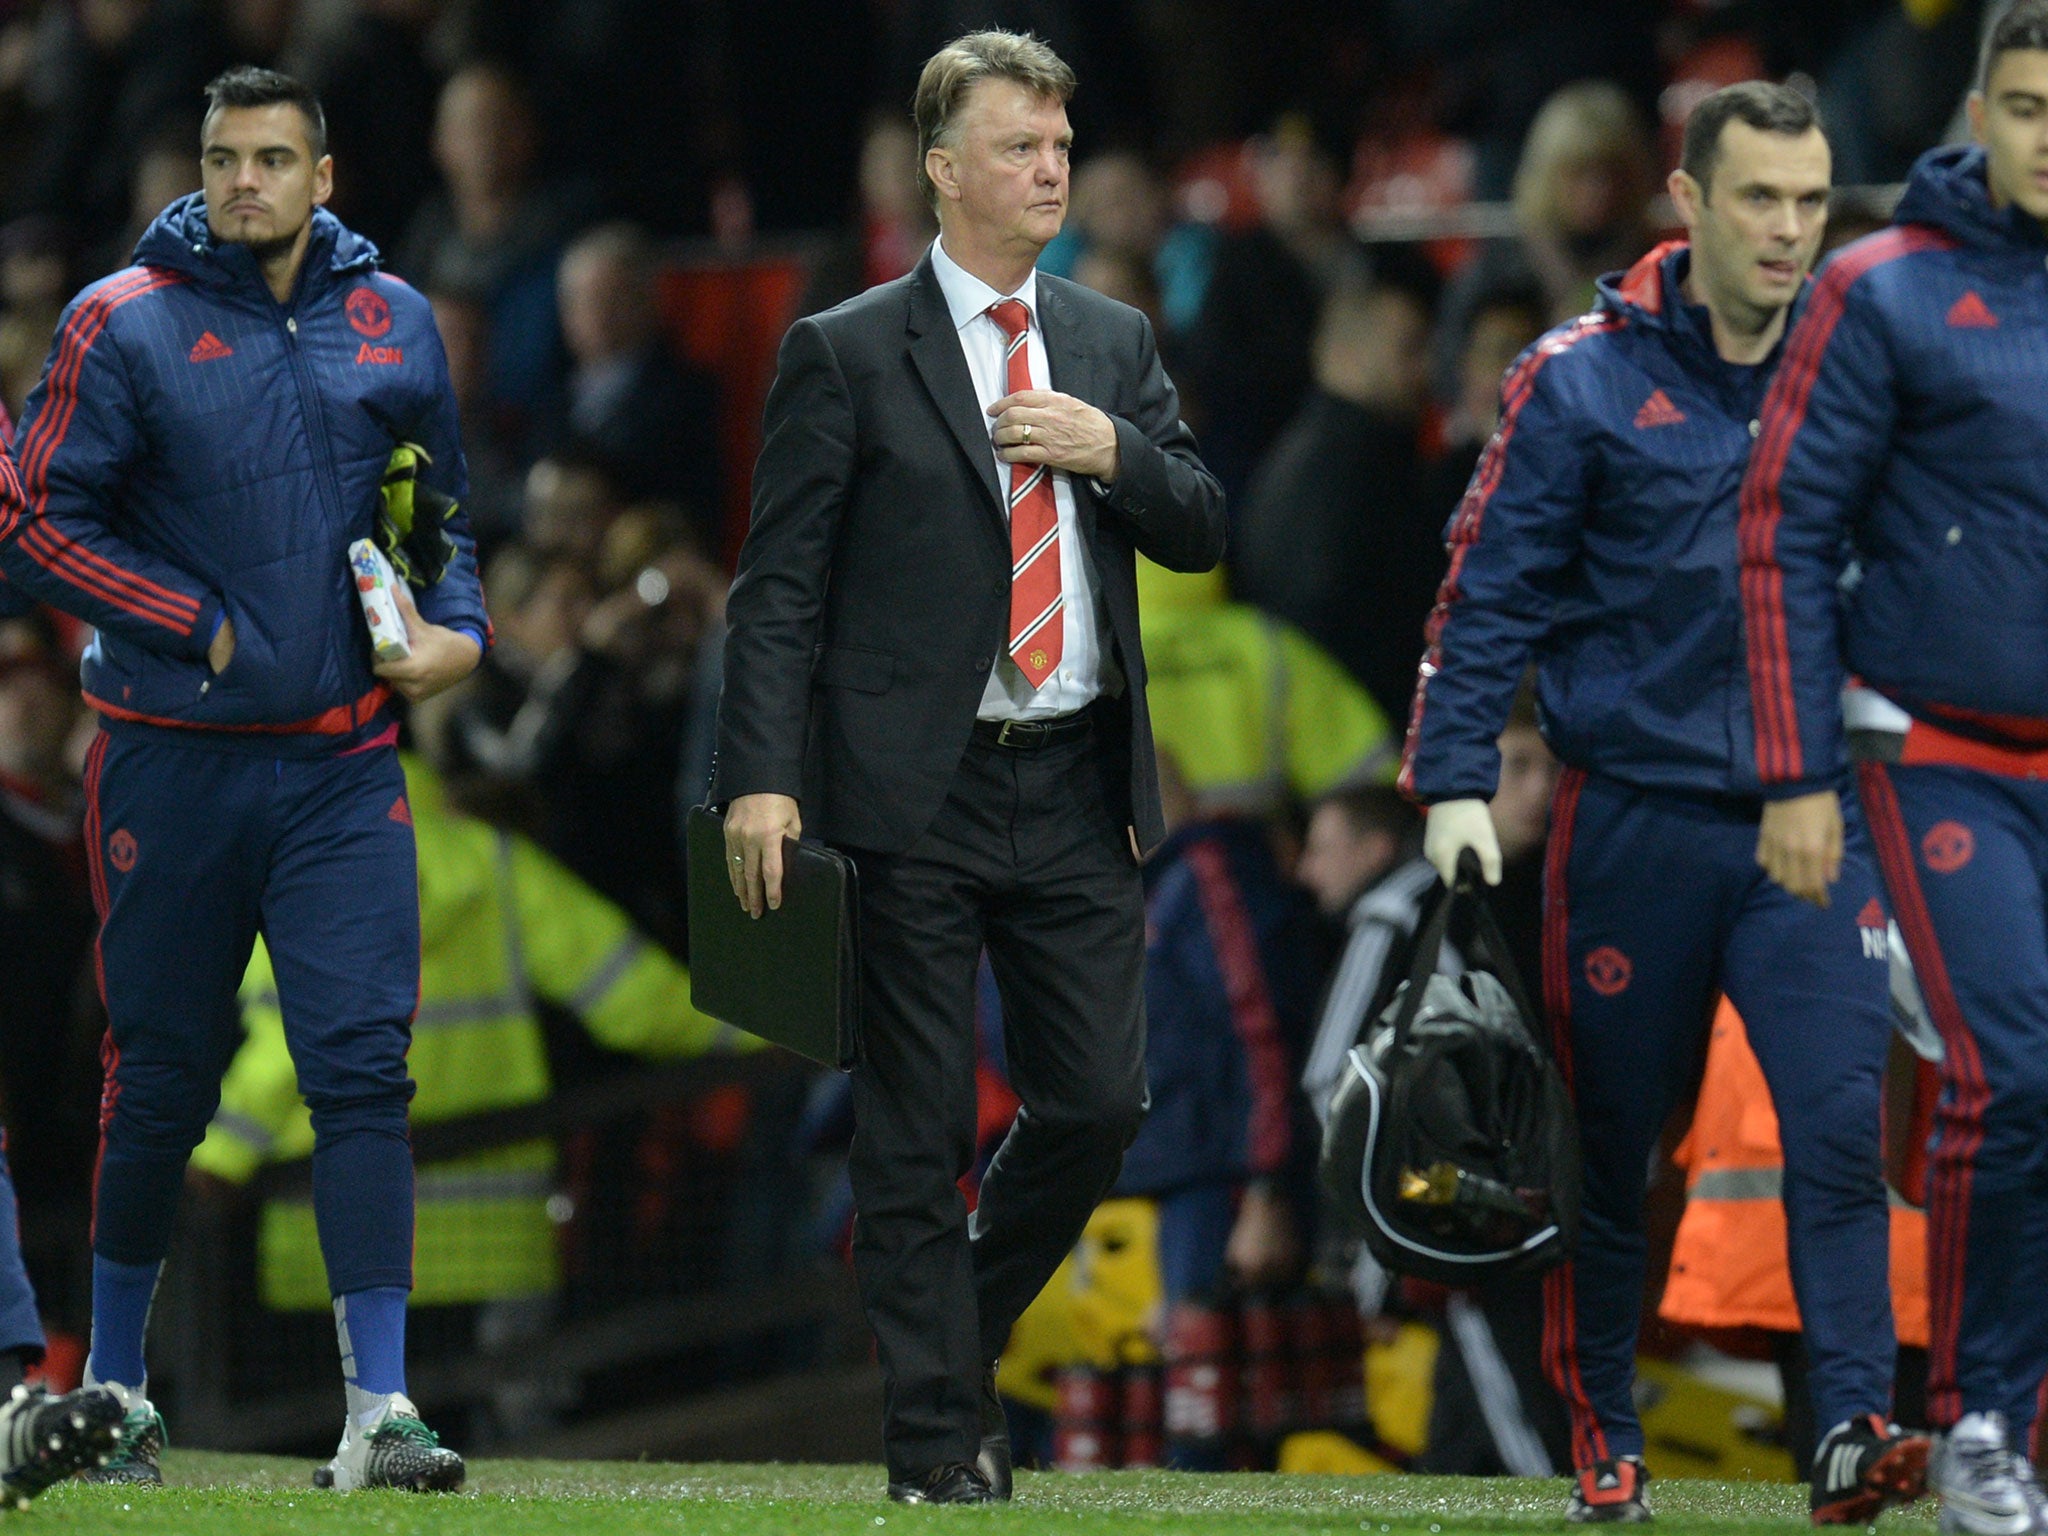 Manchester United manager Louis van Gaal has two games to save his job